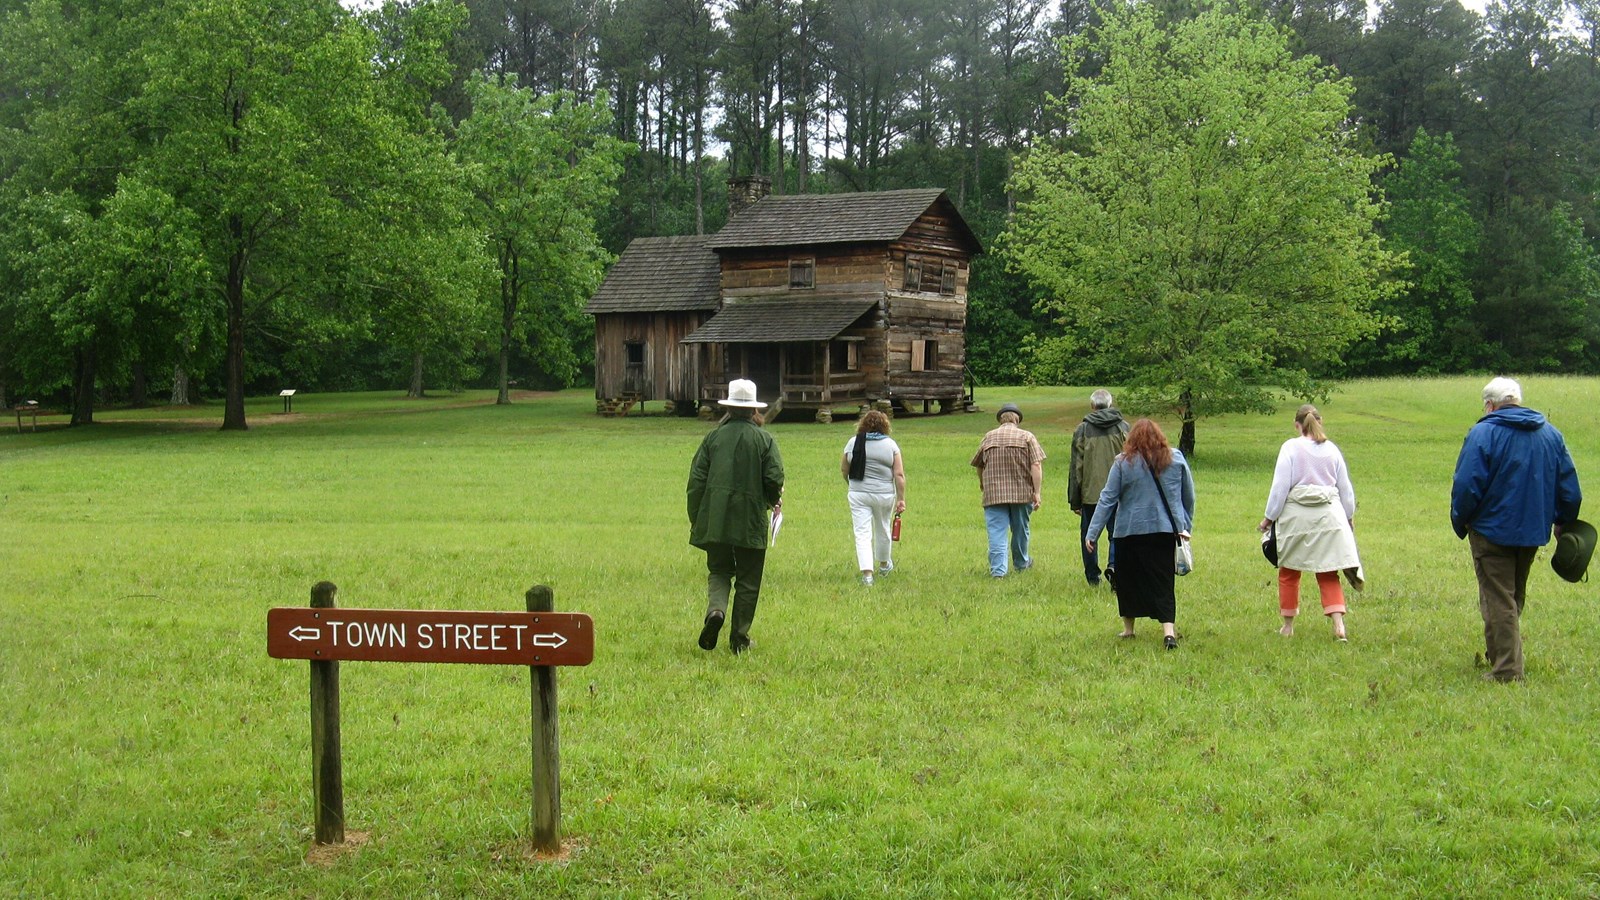 People walk across a grassy field towards a wooden historic building.